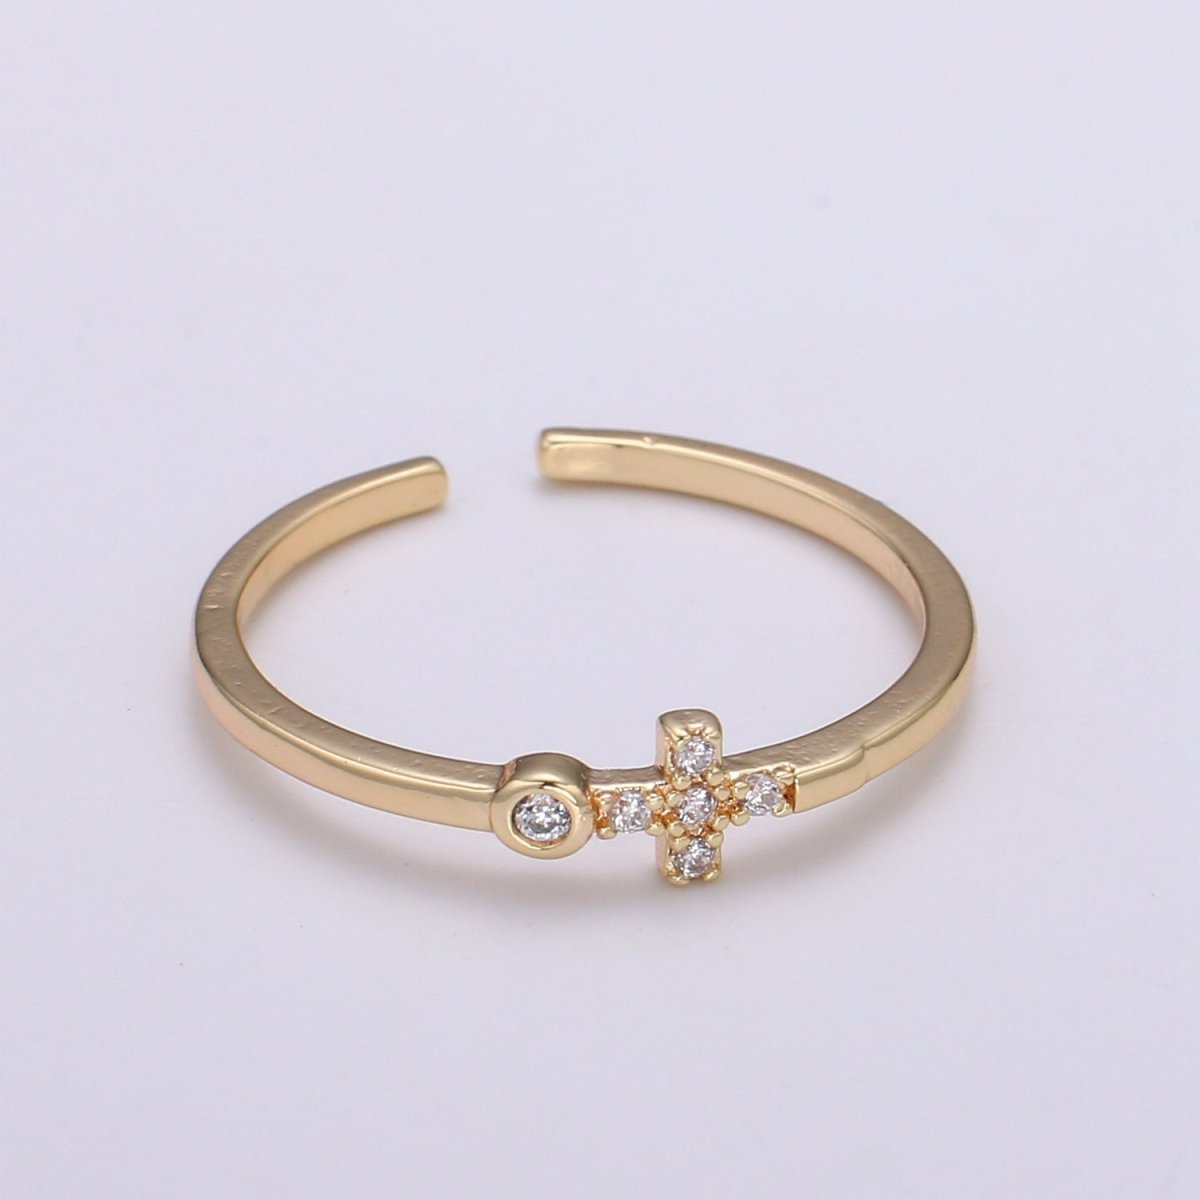 Delicate Sideway Cross Ring 18k gold Filled Open Adjustable Ring R306 - DLUXCA